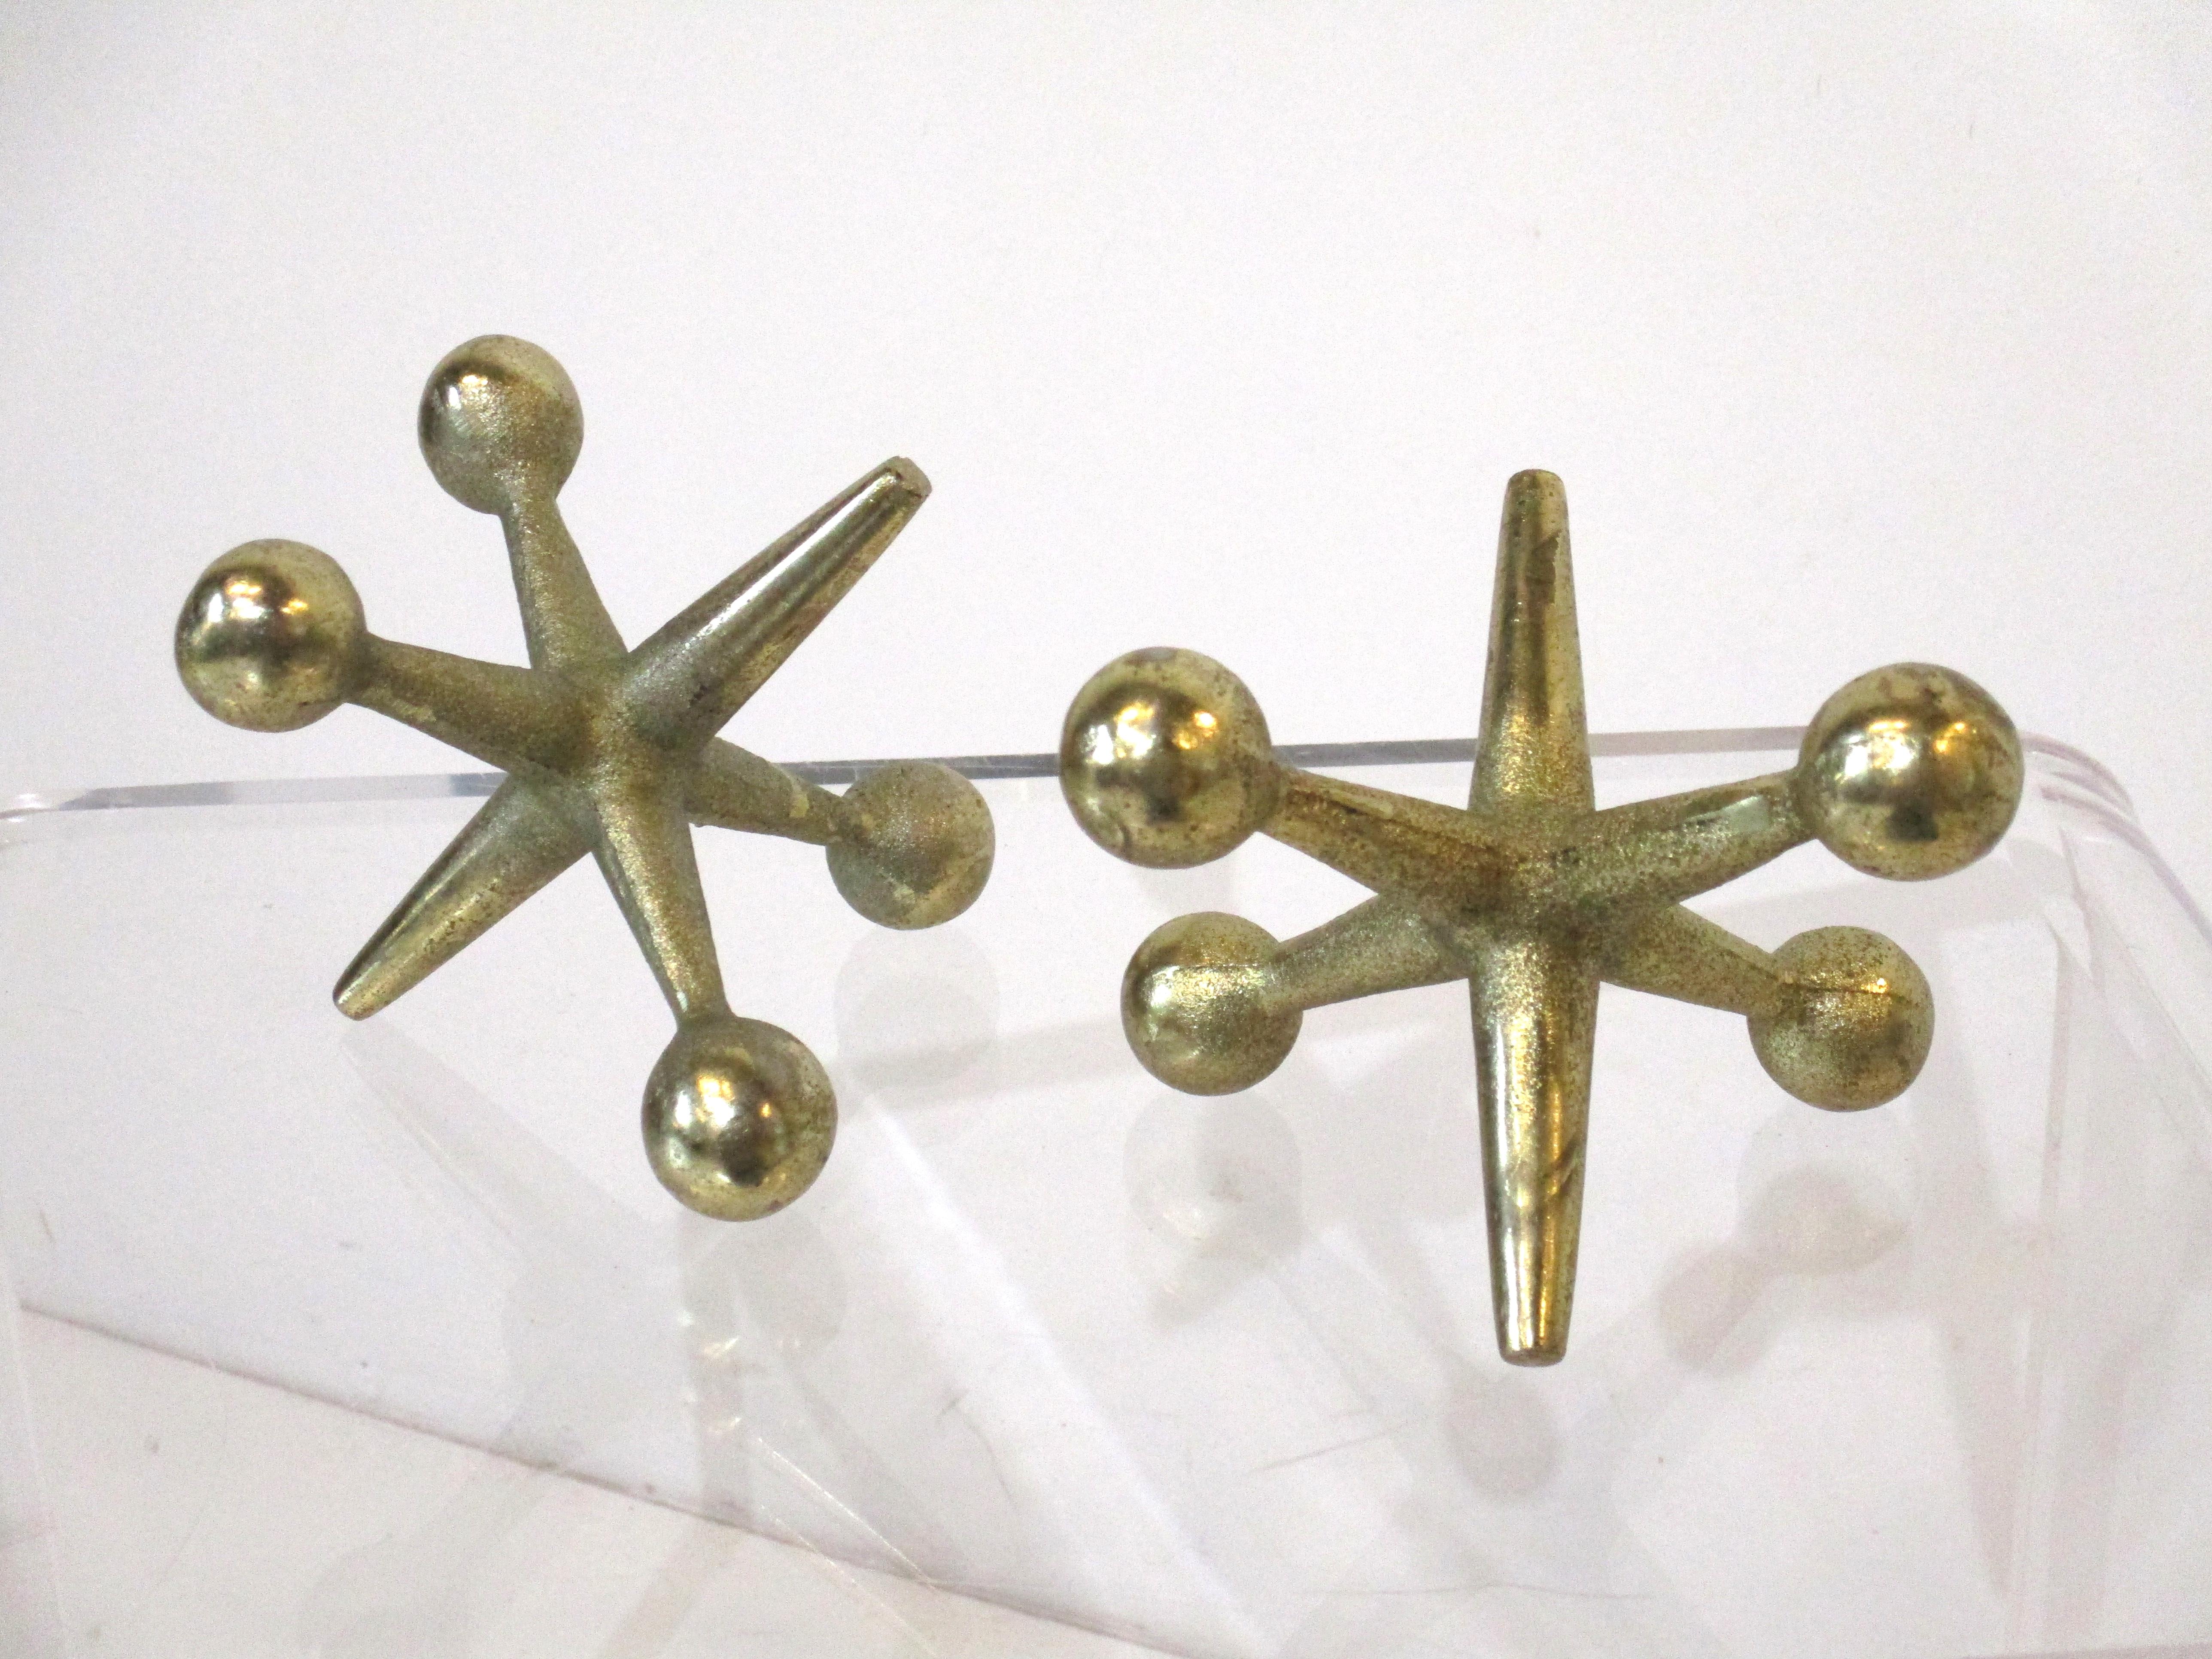 20th Century Bill Curry Lg. Brass Jacks Sculptures / Bookends / Paperweight for Design Line For Sale